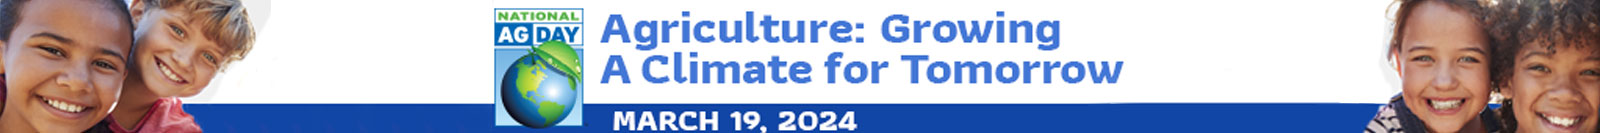 National Ag Day is March 19, 2024, Agriculture: Growing a Climate for Tomorrow